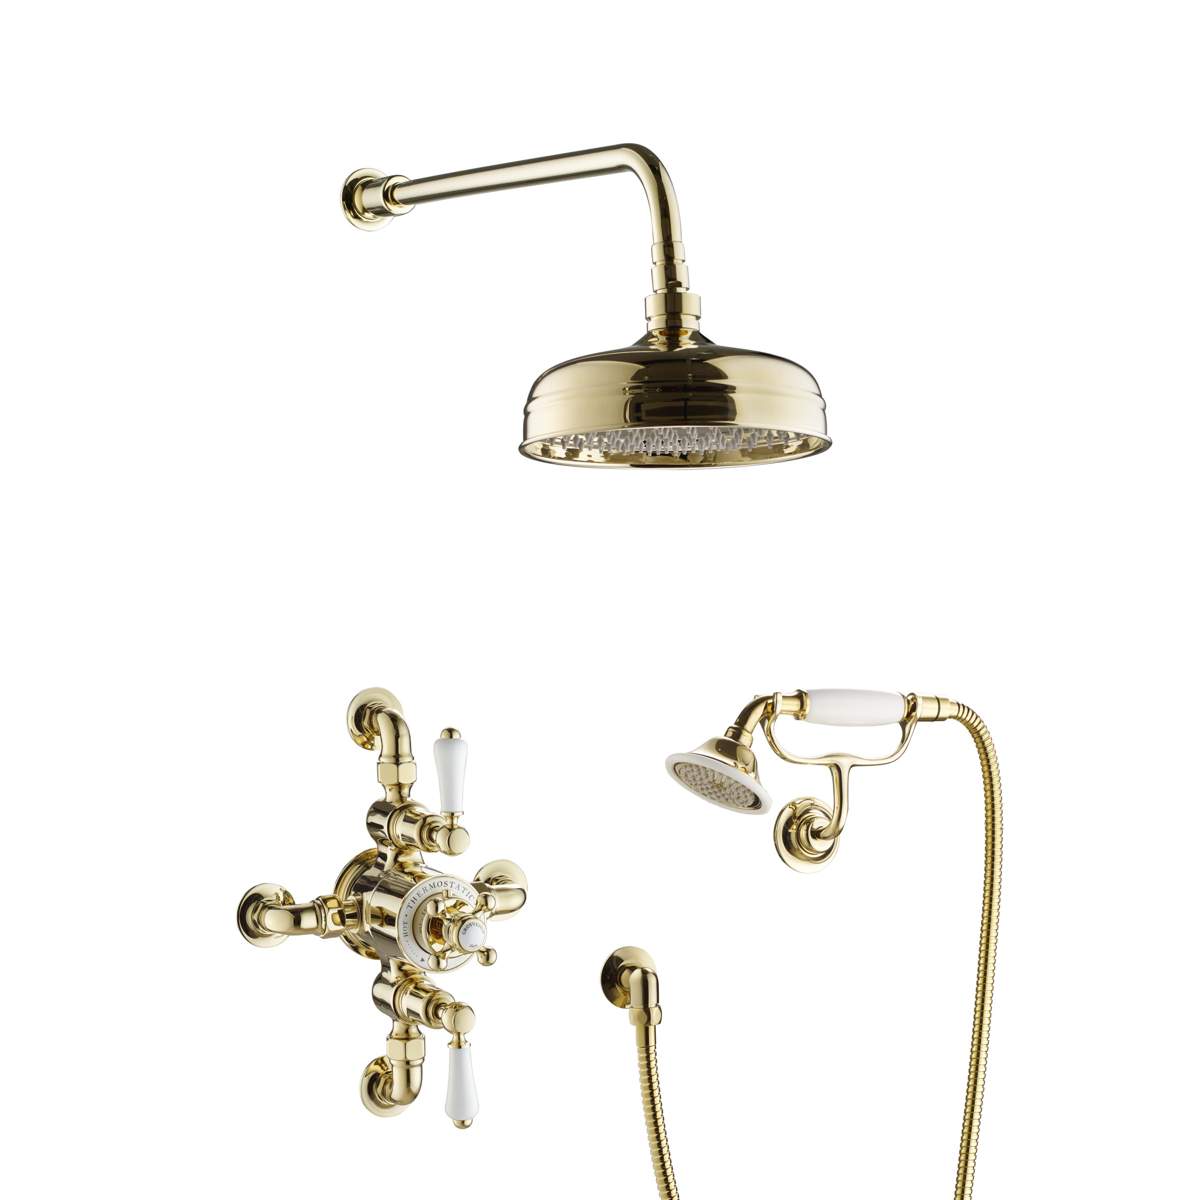 JTP Grosvenor Cross Antique Brass Edition Exposed Thermostatic Valve with 2 Outlet (GRO281G)